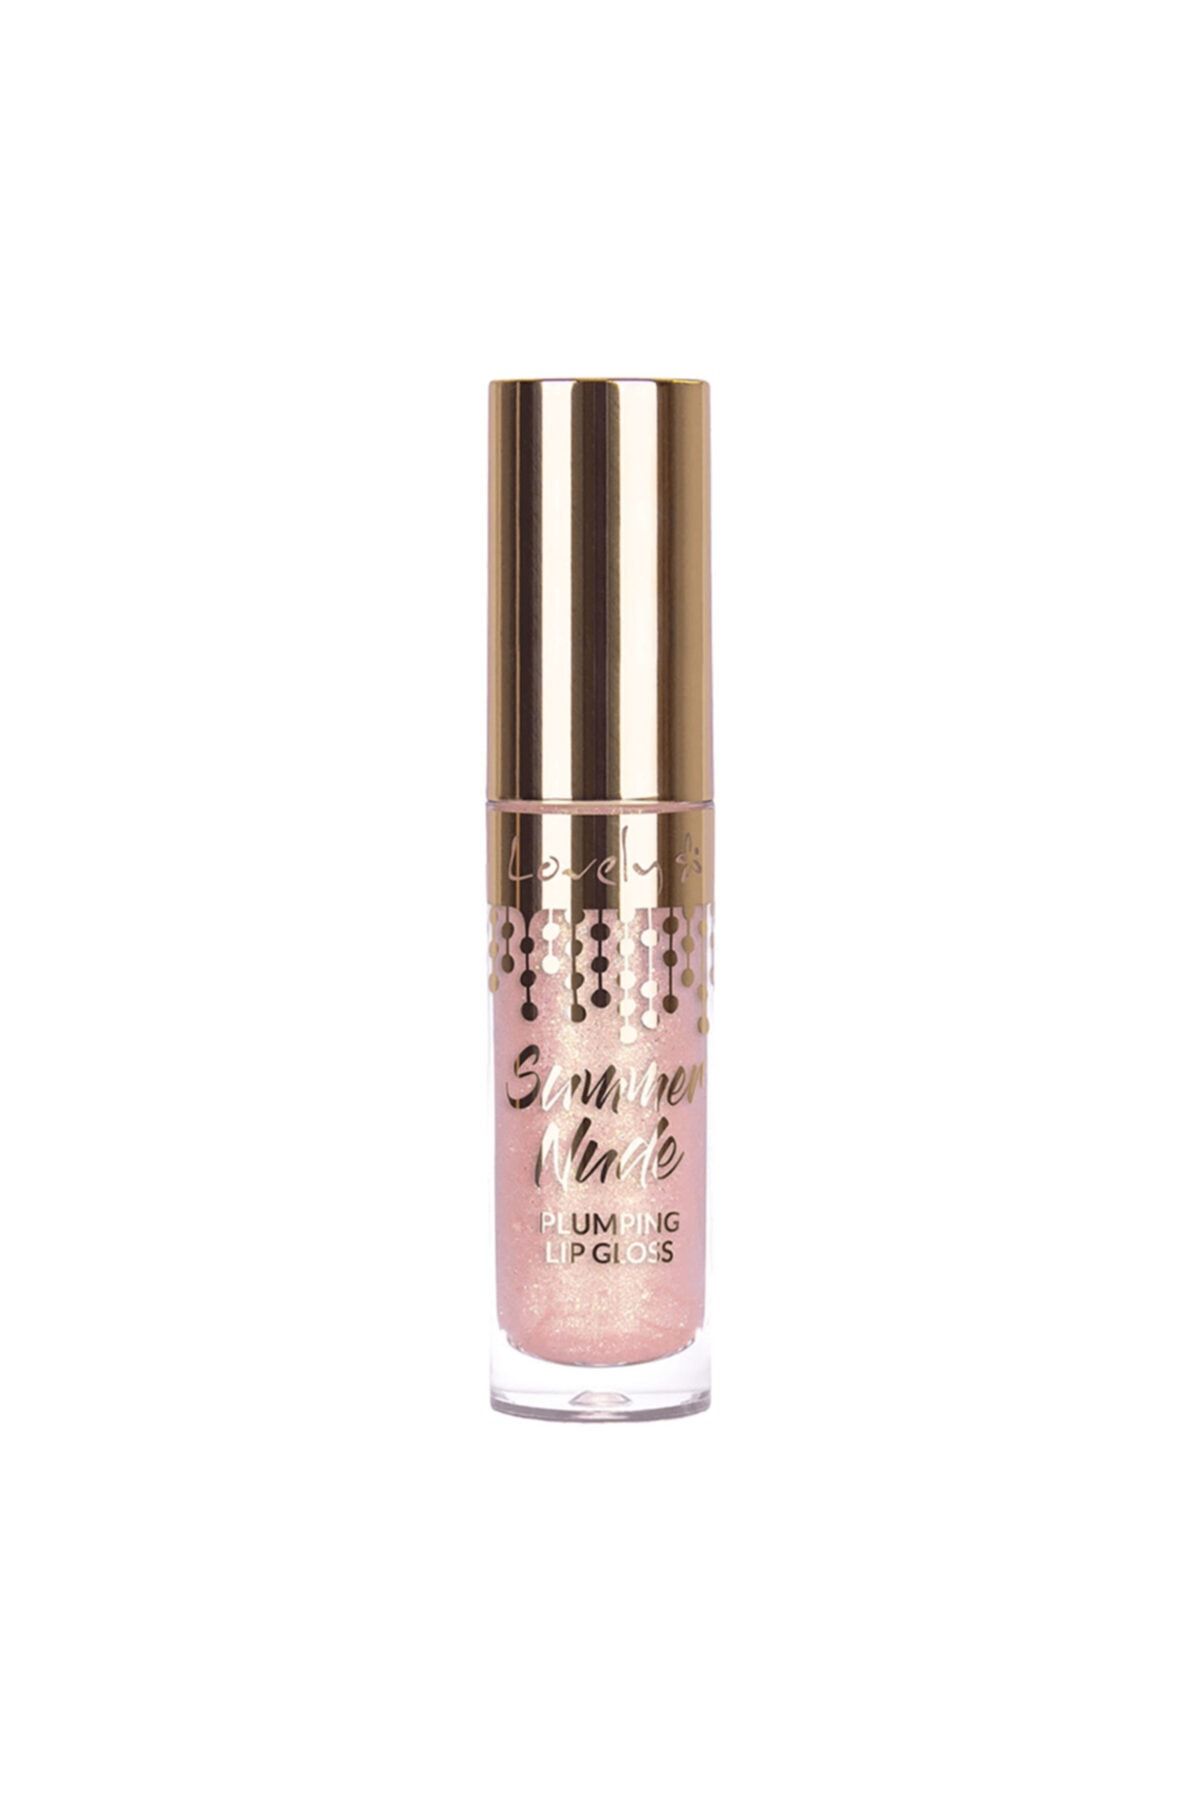 Lovely Summer Nude Plumping Lip Gloss No: 1